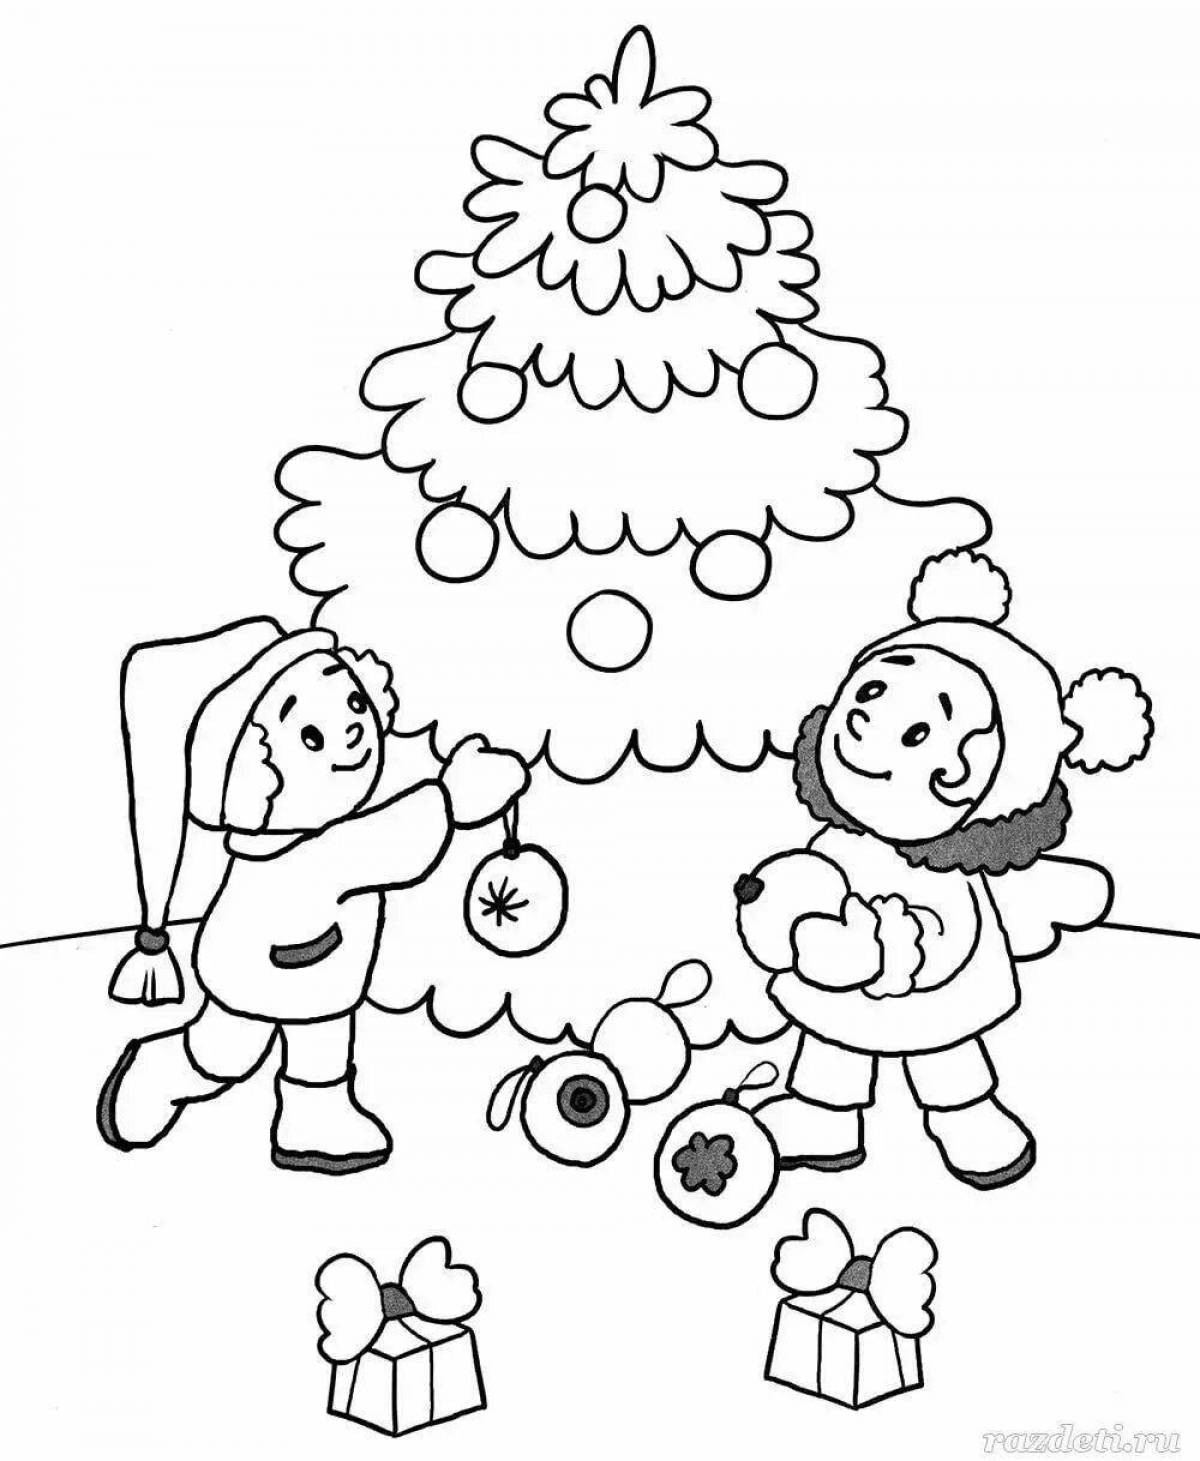 Great winter coloring book for kids 6-7 years old